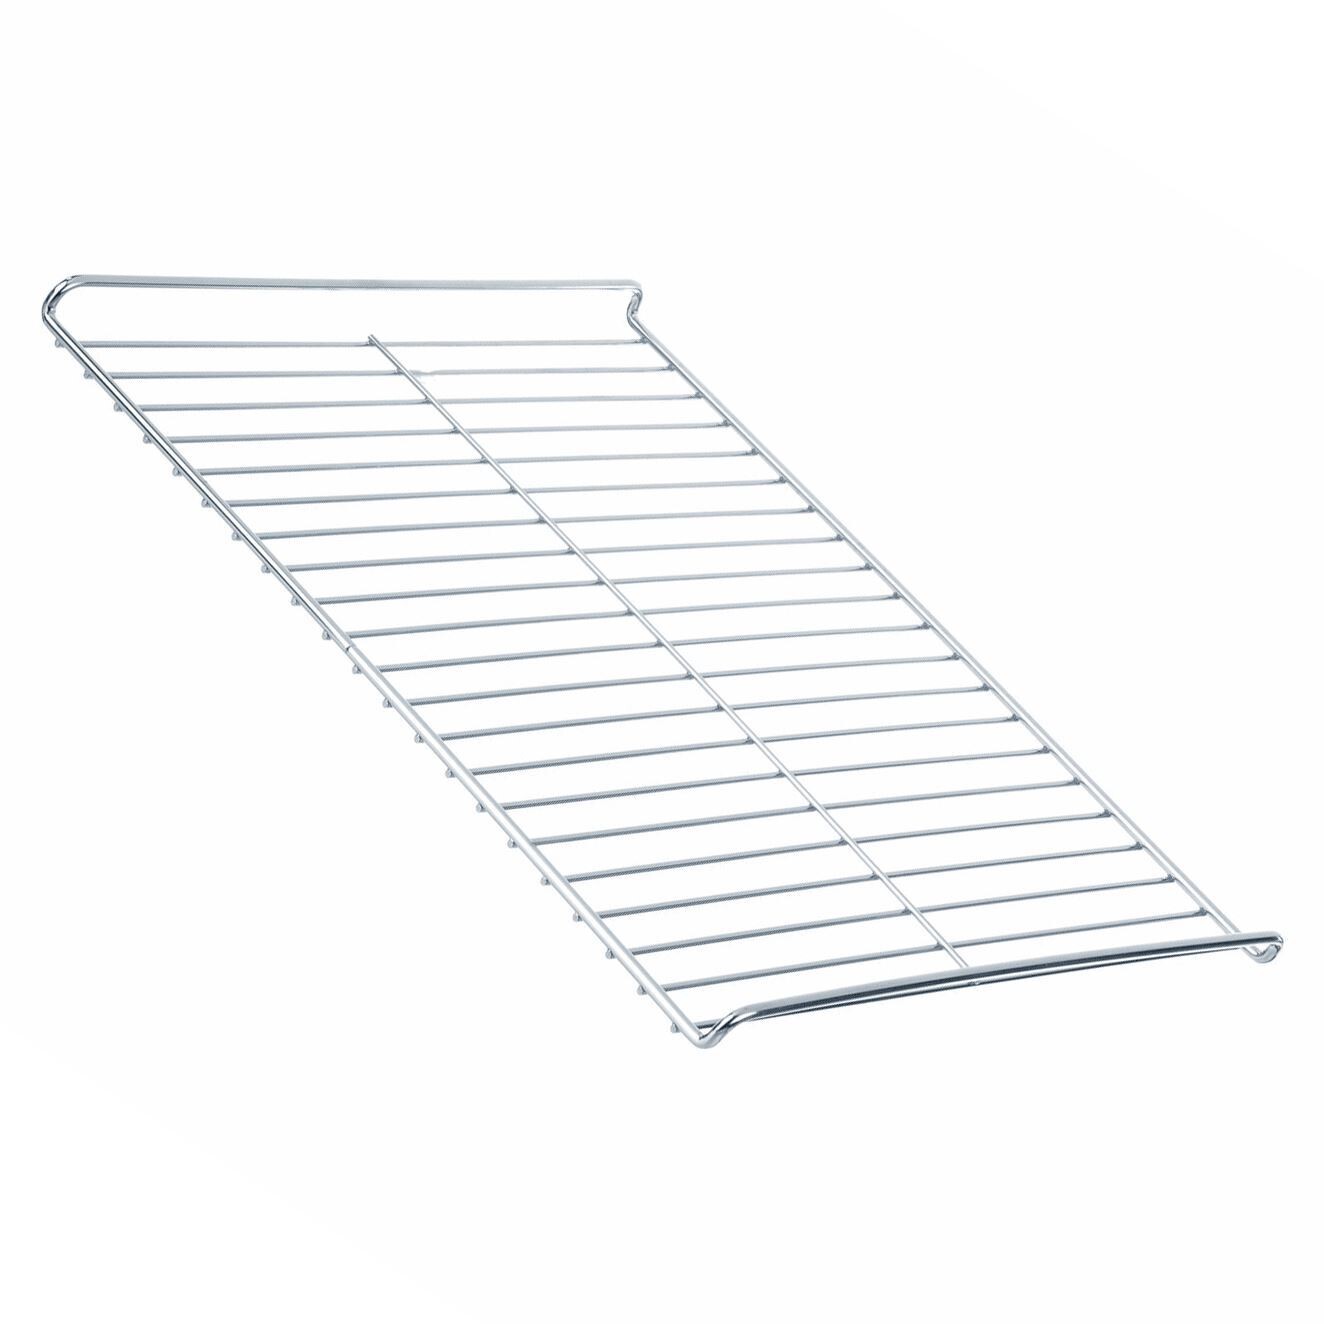 SPARES2GO Cooker Grill Pan Grid Rack Stand for Zanussi Oven 344mm x 222mm